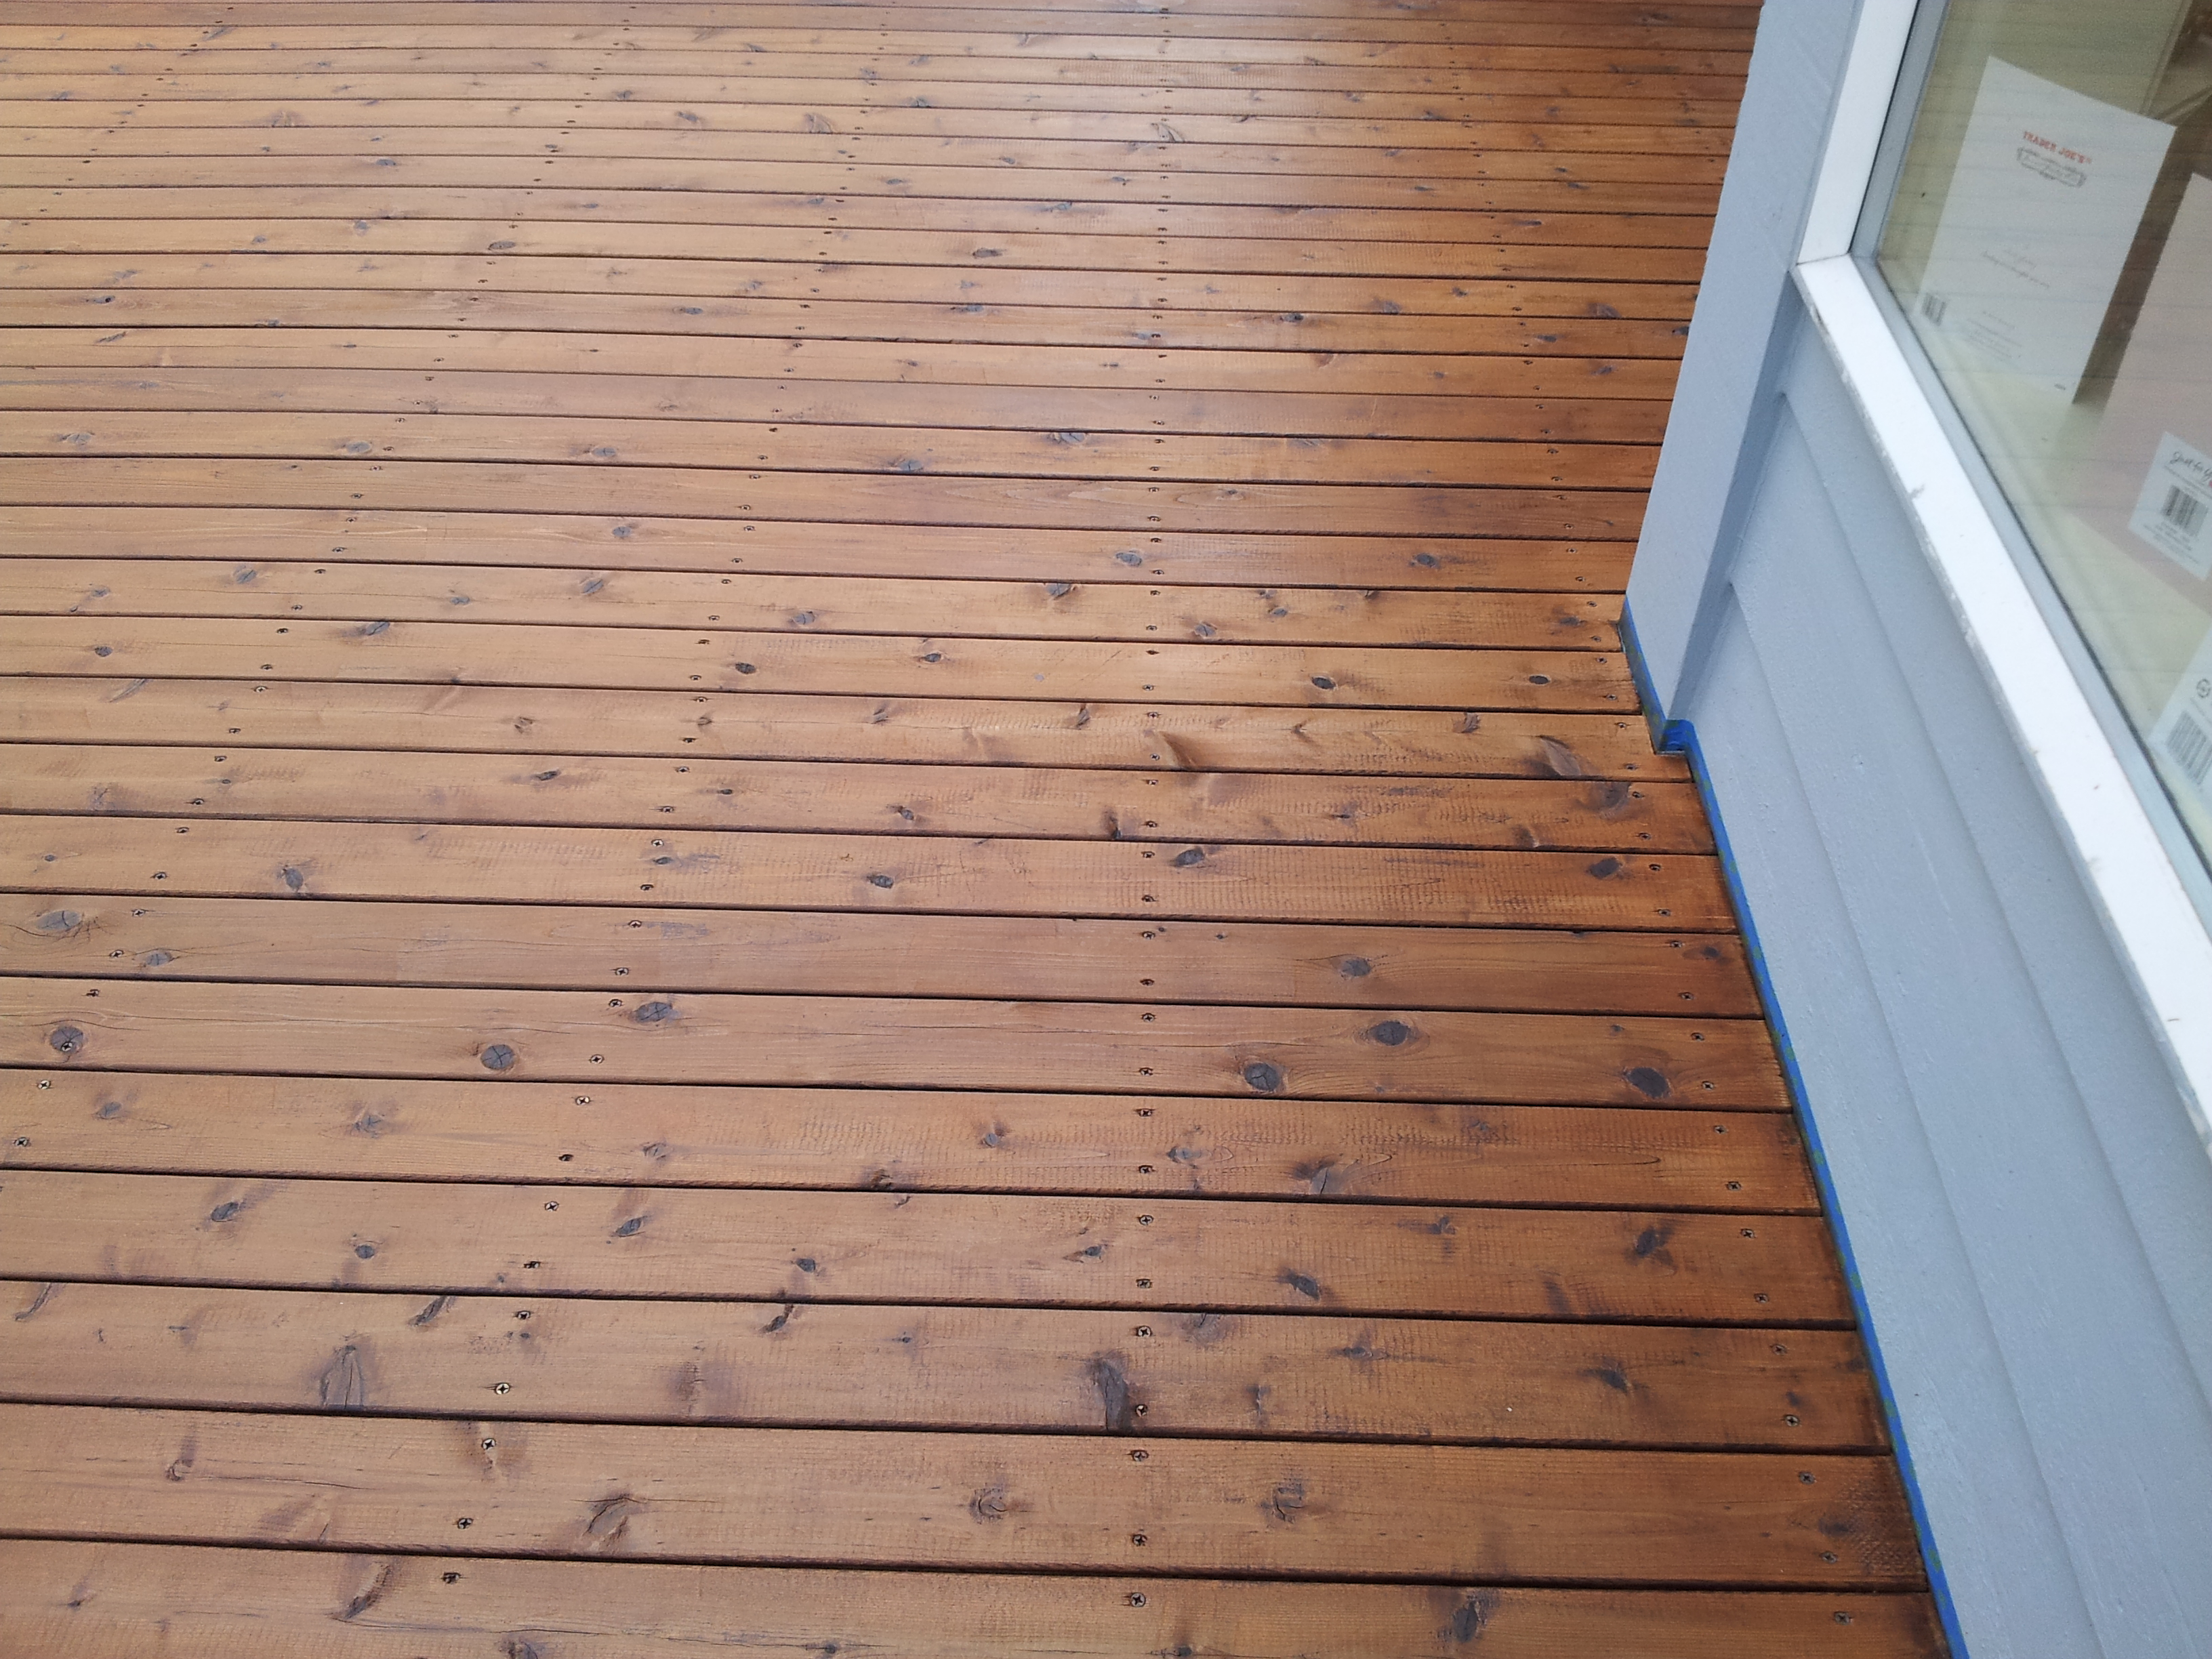 Oil Based Deck Stains Best Deck Stain Reviews Ratings throughout size 3264 X 2448